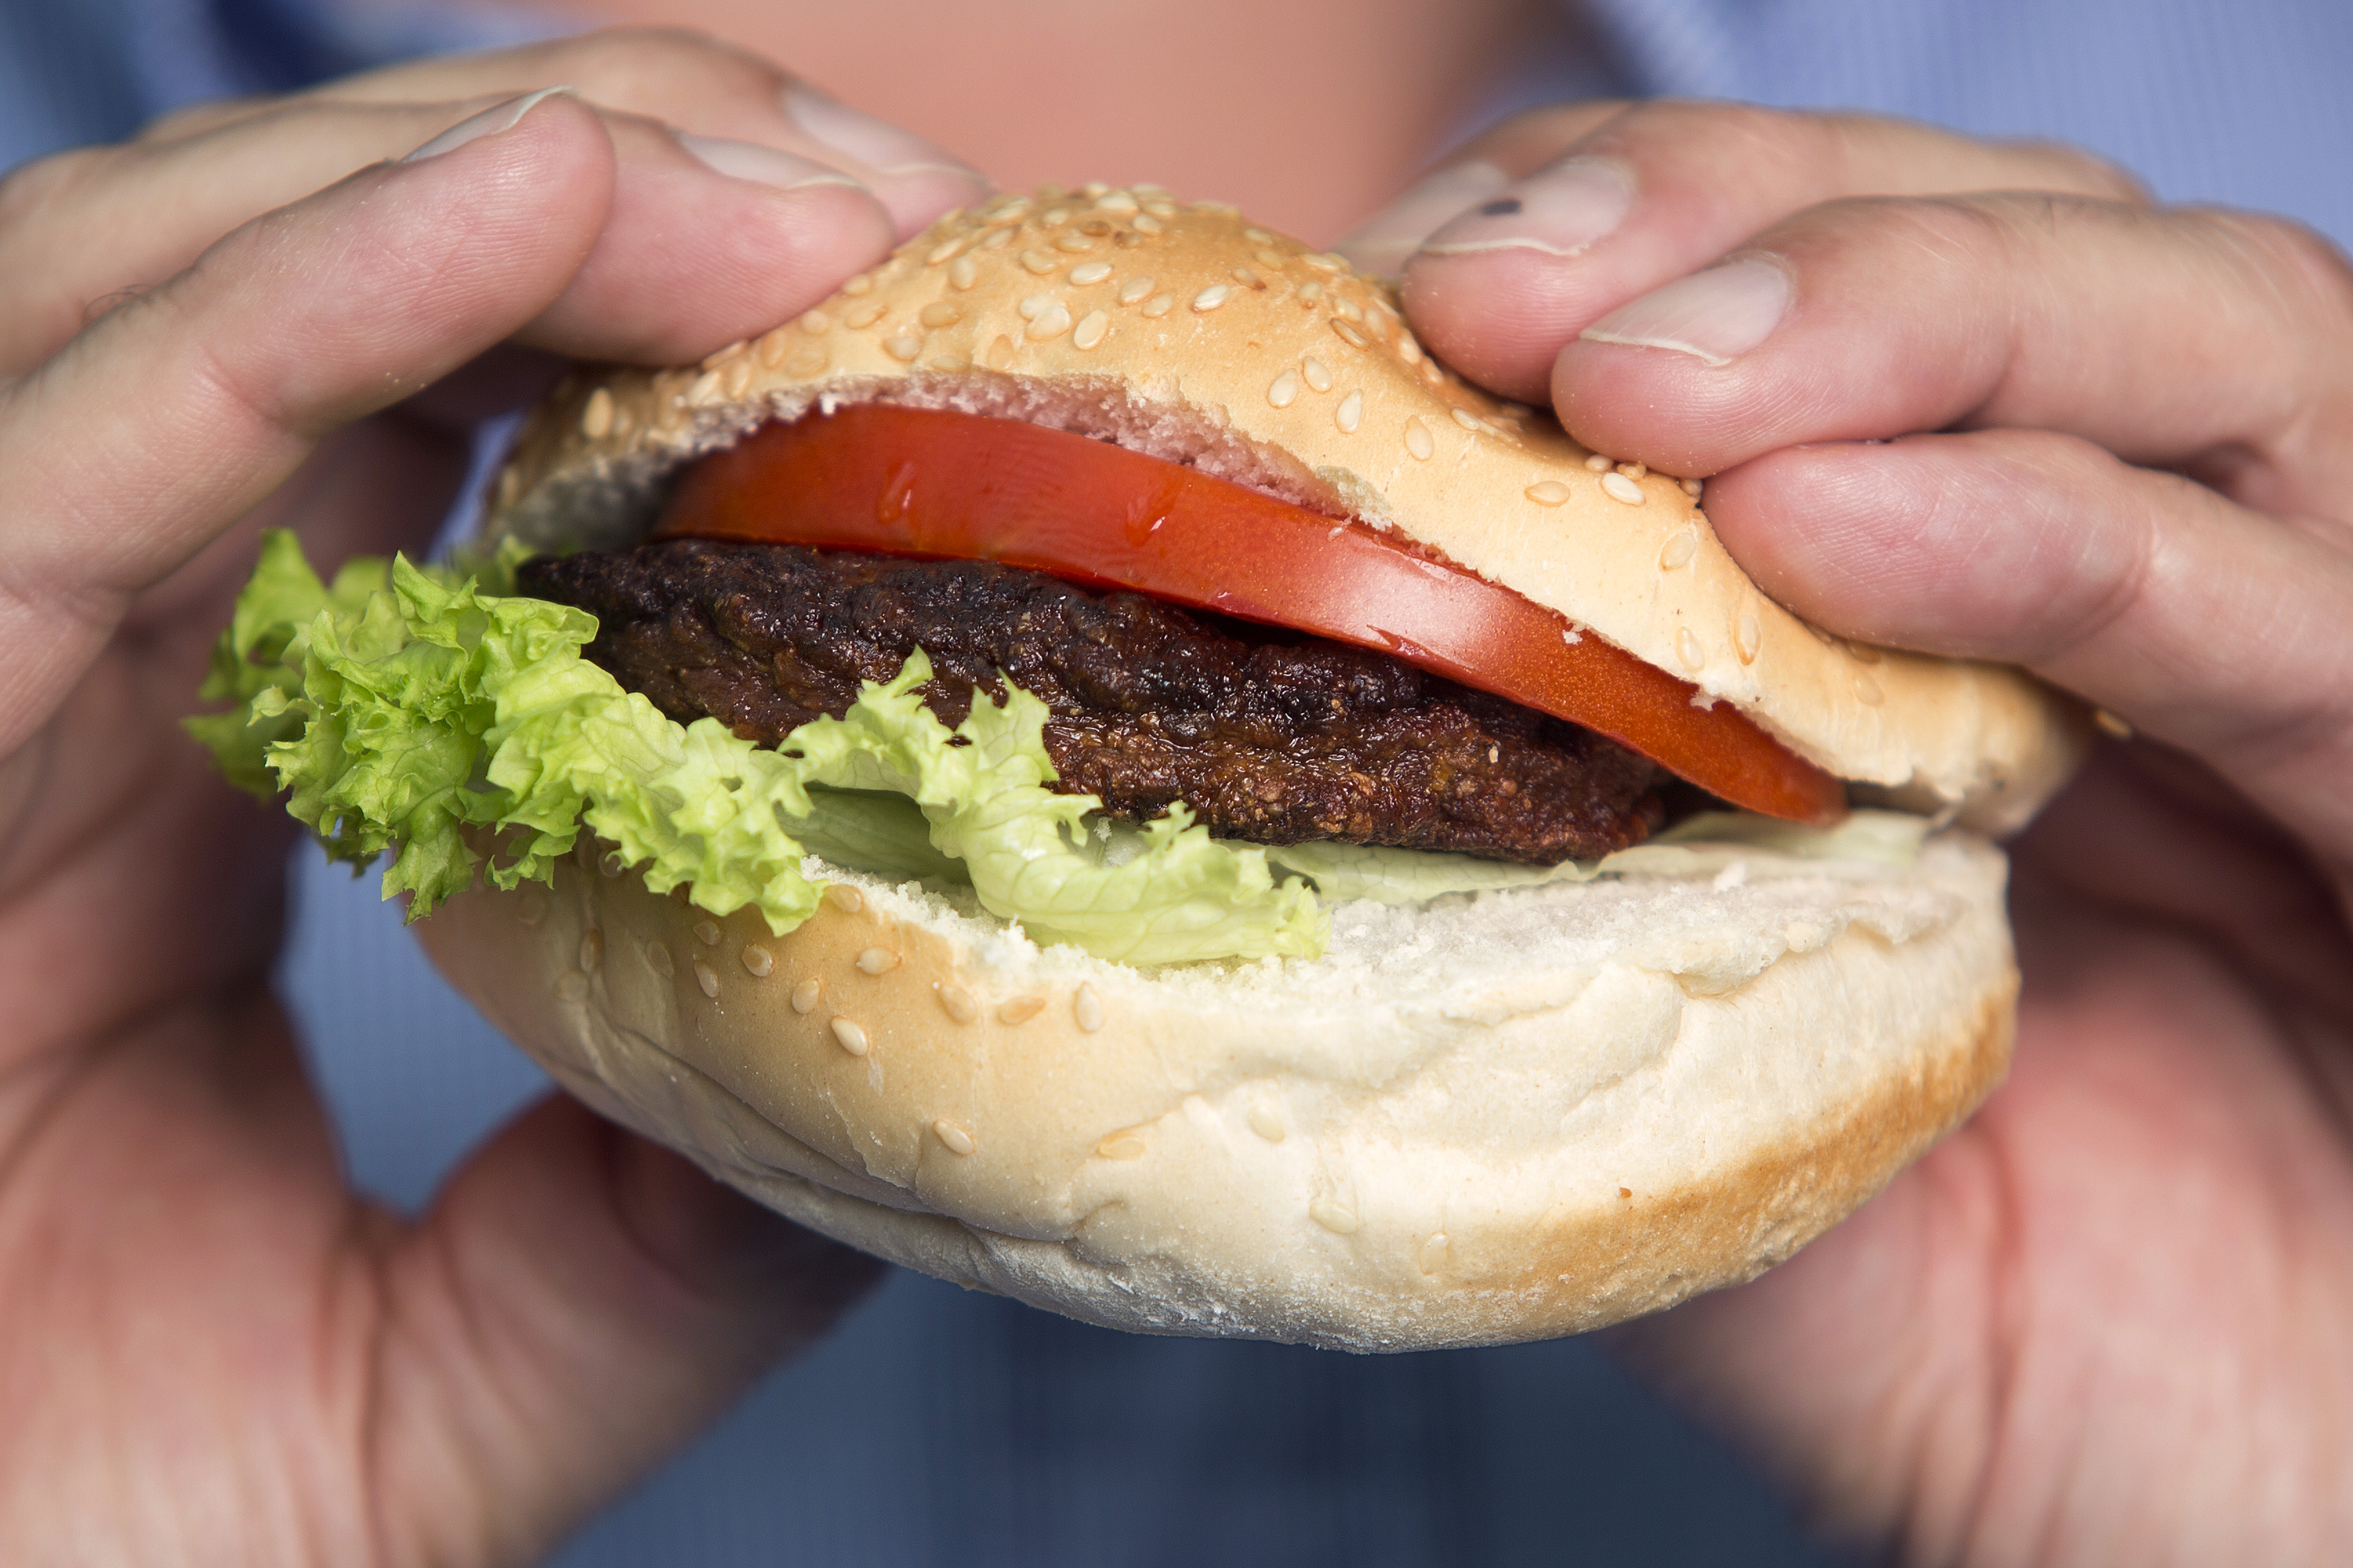 A beef burger created by stem cells harvested from a living cow is held for a photograph by Mark Post, a Dutch scientist, following a Bloomberg Television interview in London, U.K., on Tuesday, Aug. 6, 2013. (Bloomberg&mdash;Bloomberg via Getty Images)